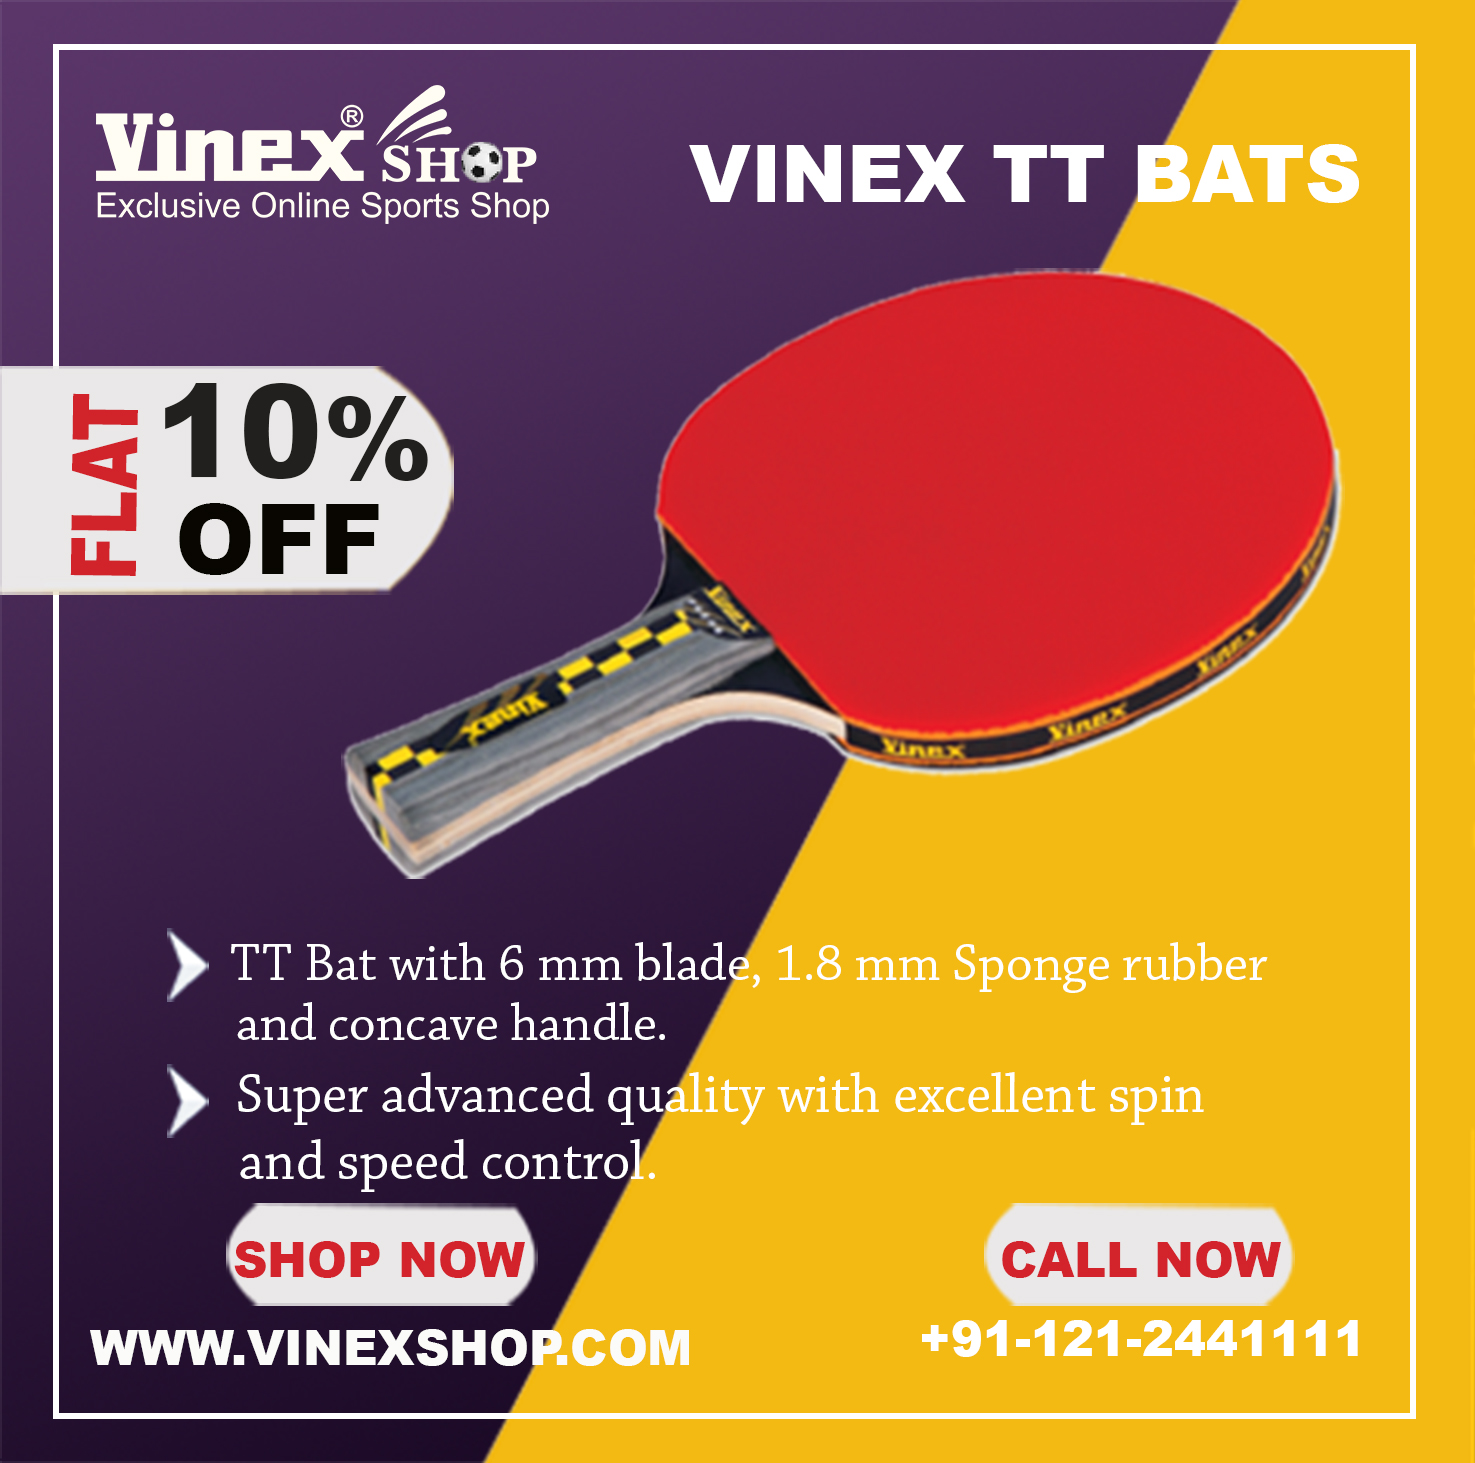 Vinex Sports and Fitness Equipment Sporting Goods and Fitness Equipment and Accessories Manufacturers and Suppliers